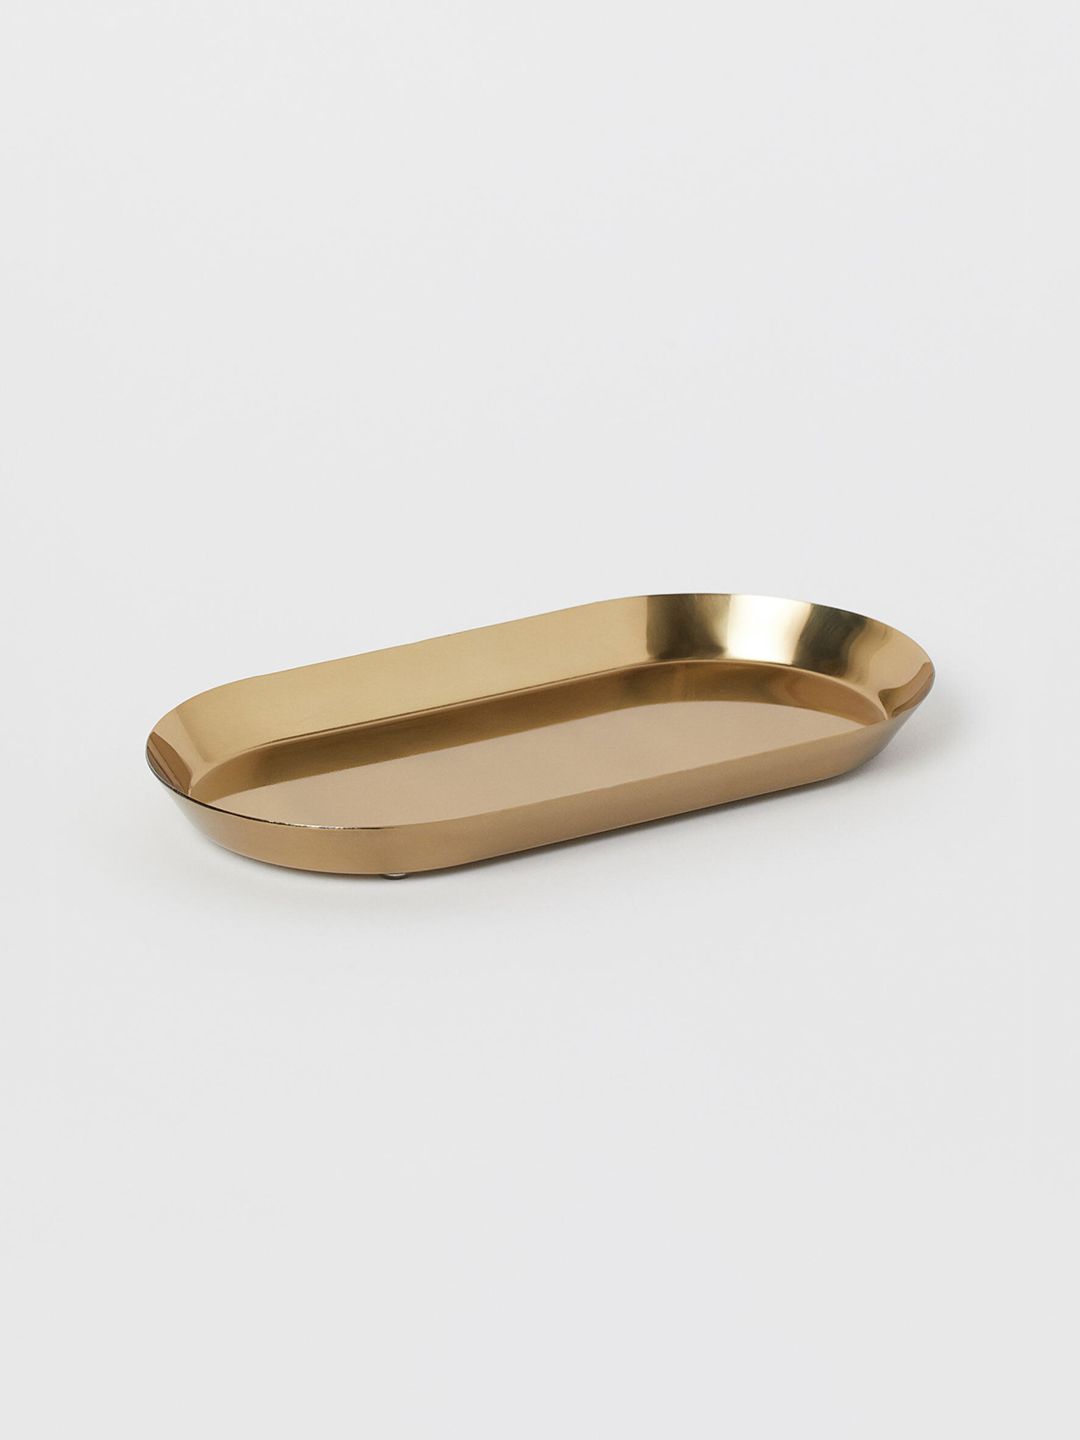 H&M Small Metal Tray Price in India